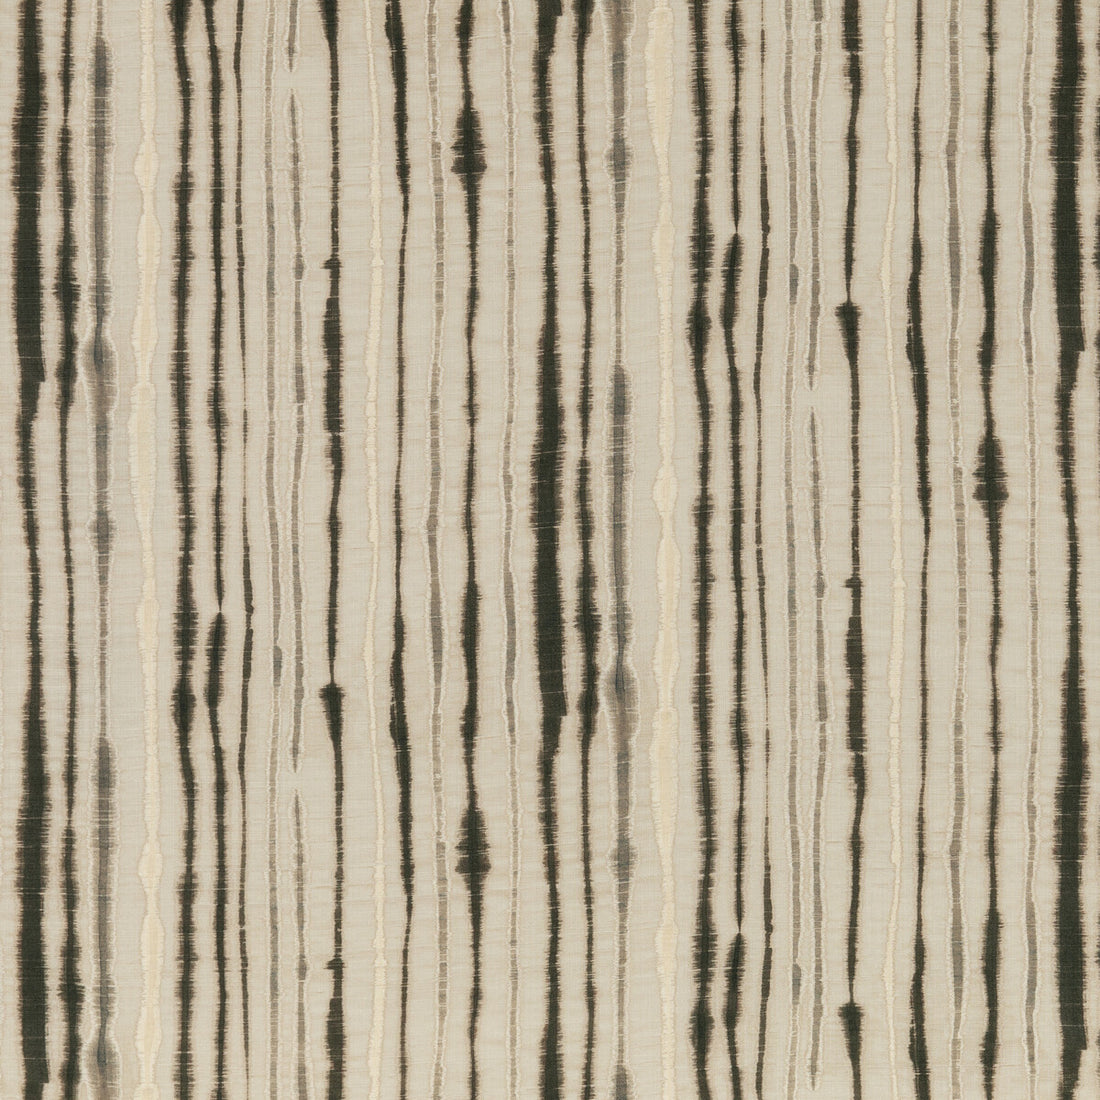 Linear fabric in charcoal color - pattern ED75038.2.0 - by Threads in the Nala Prints collection